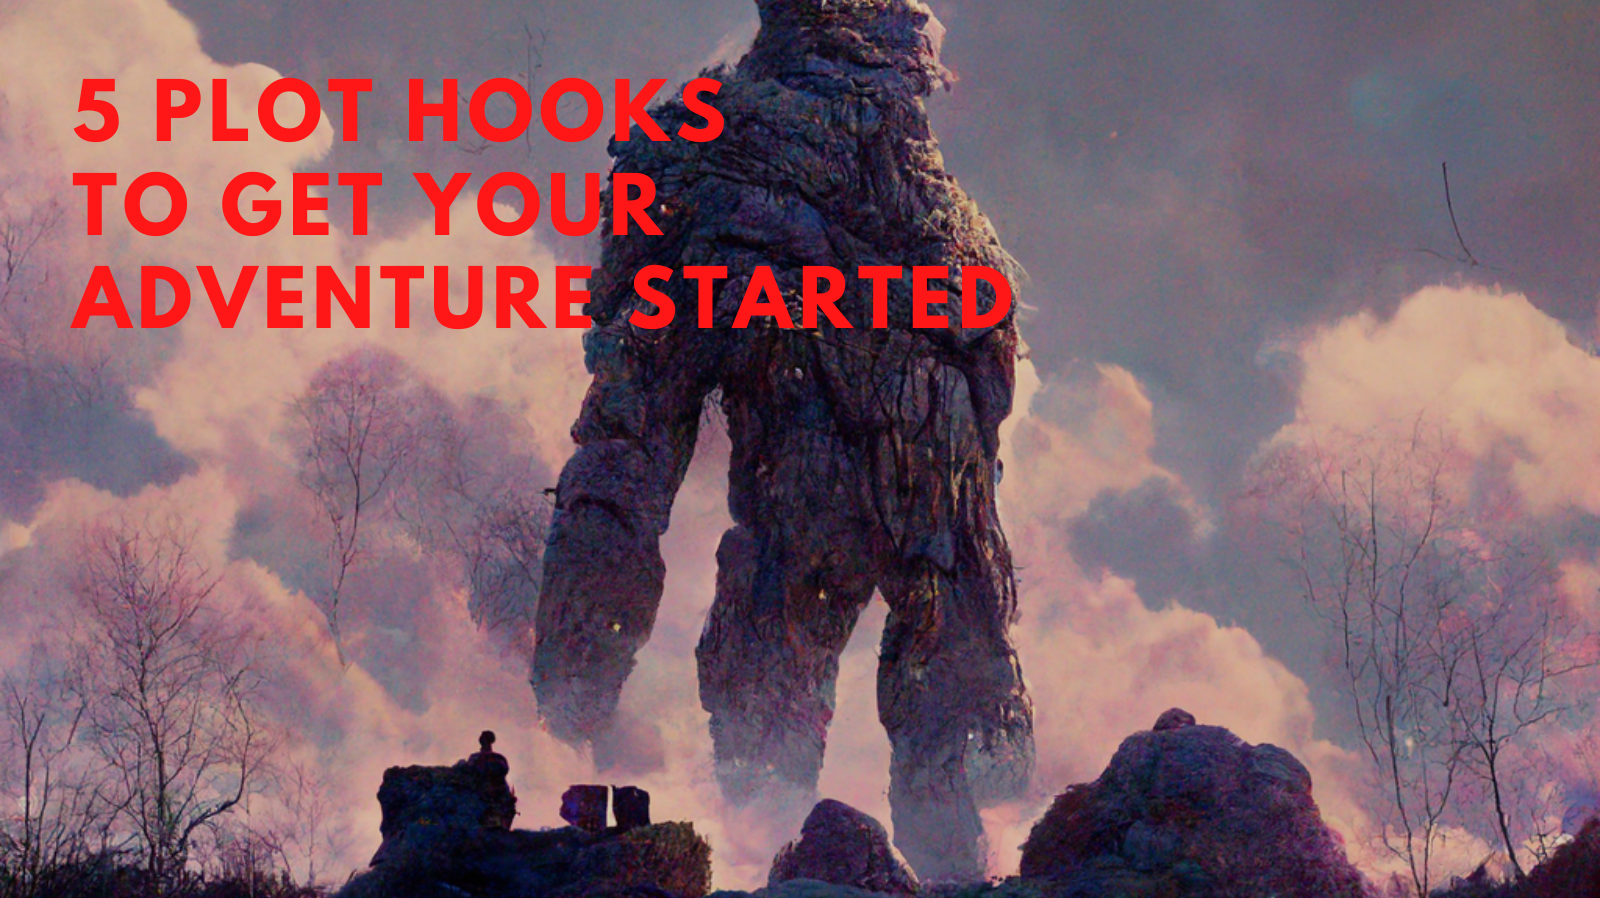 5 plot hooks to get your adventure started